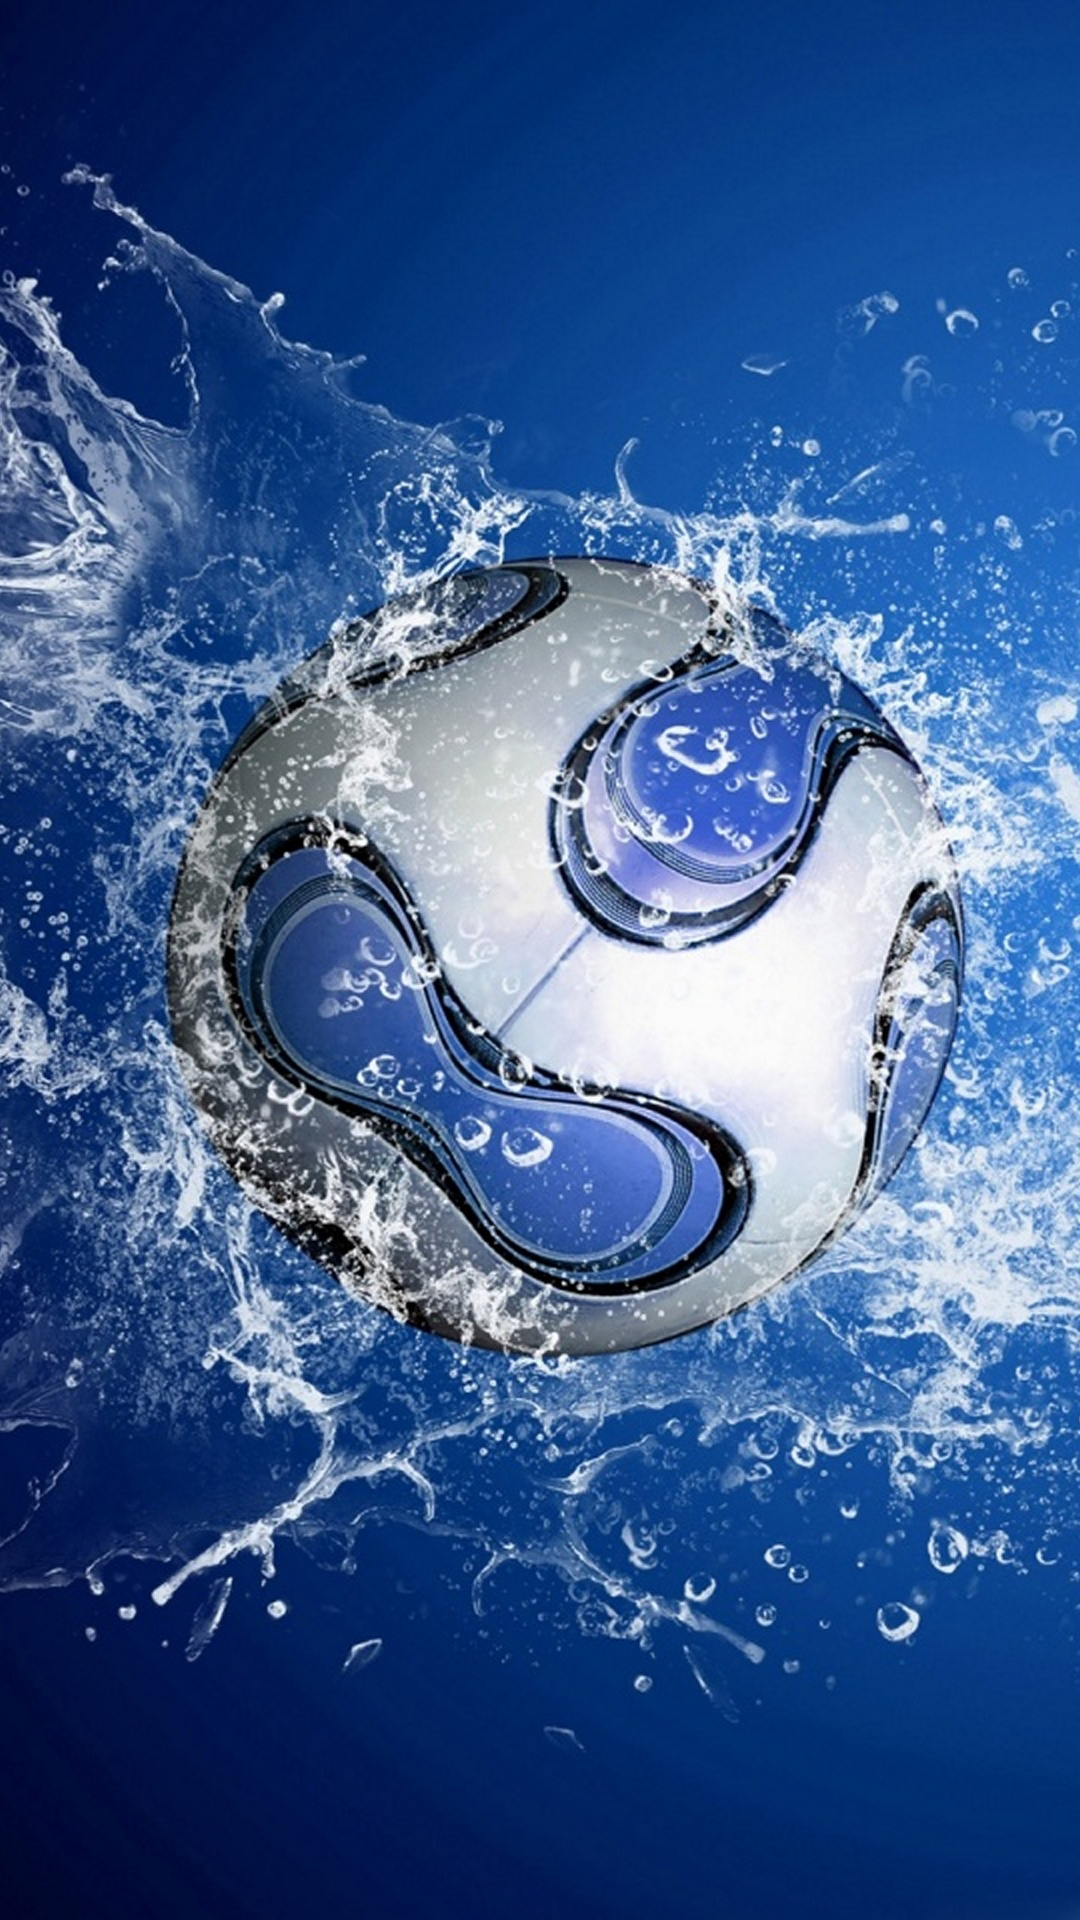 Free Football Wallpapers For Iphone - Football Wallpapers Hd For Mobile - HD Wallpaper 